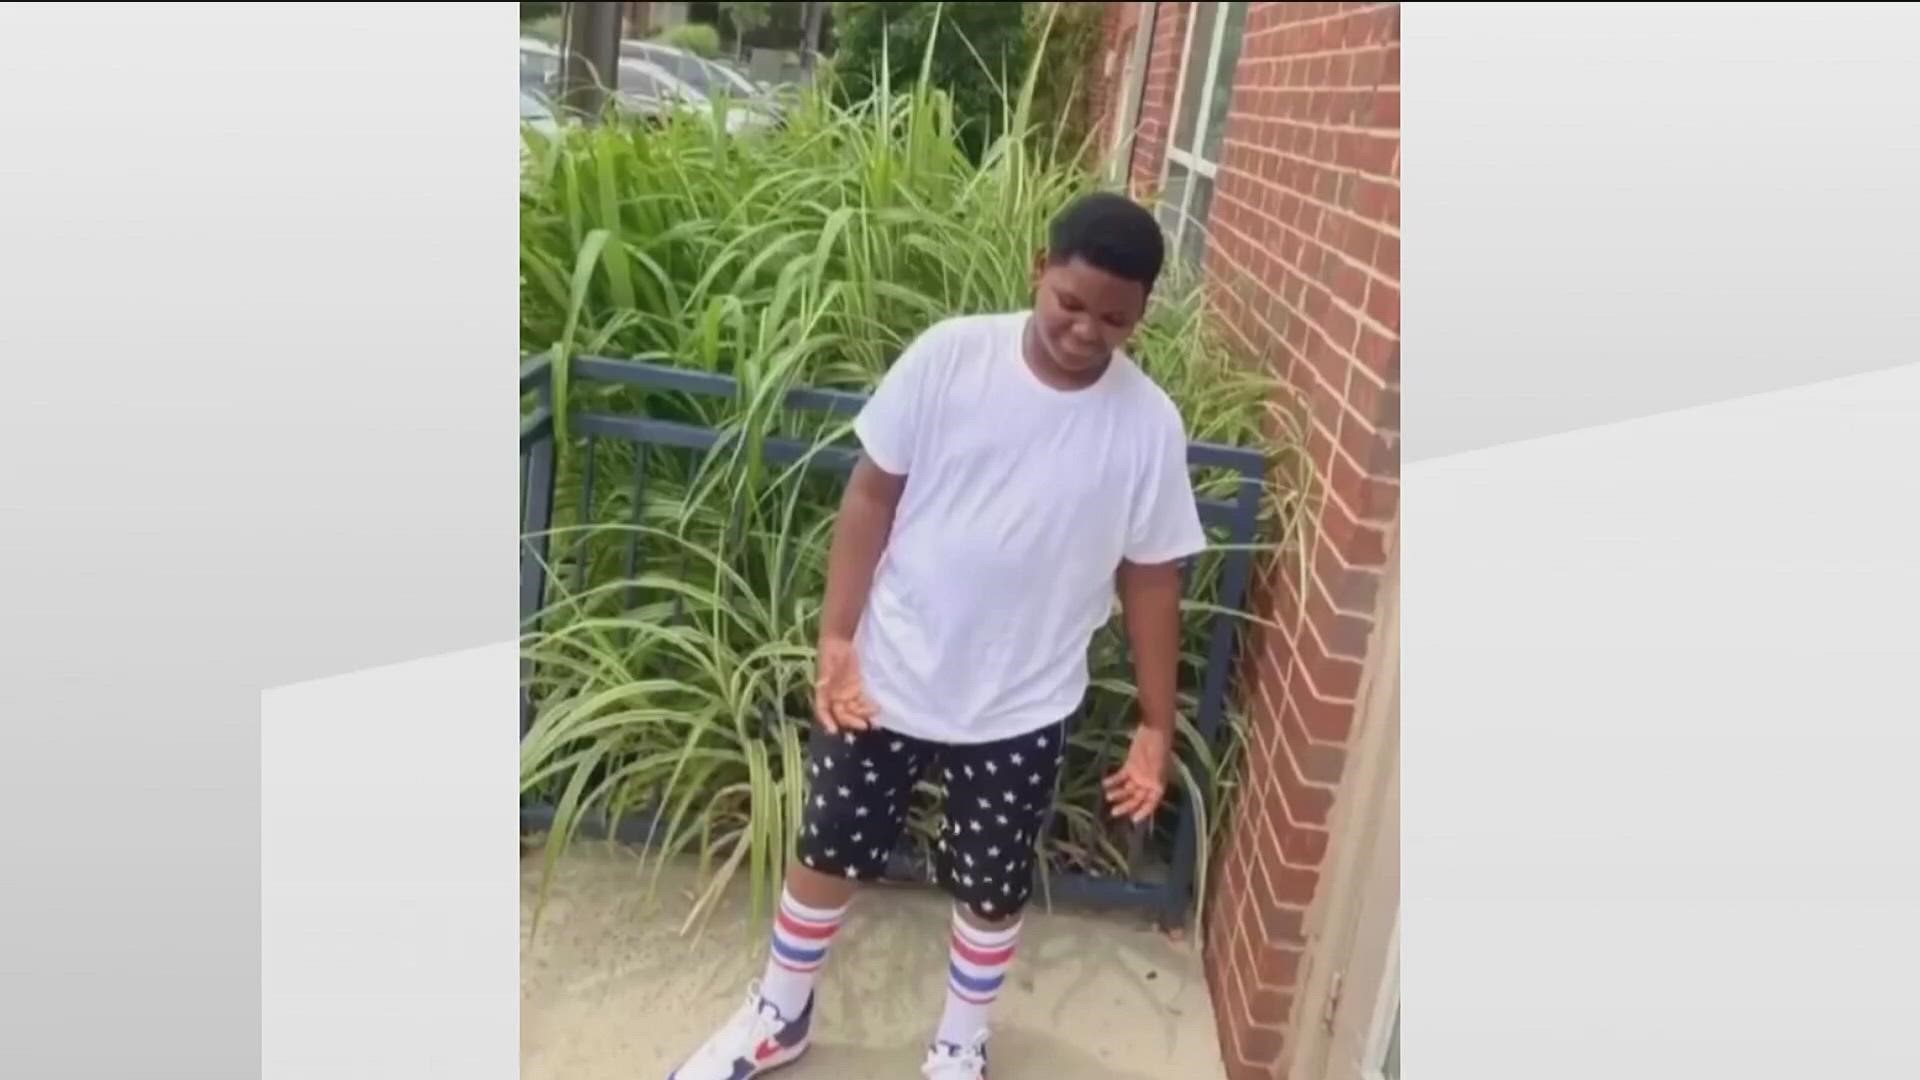 A family member of a teenage boy shot and killed after enjoying a night of skating with friends, is turning the tragedy into action in hopes of reducing gun violence